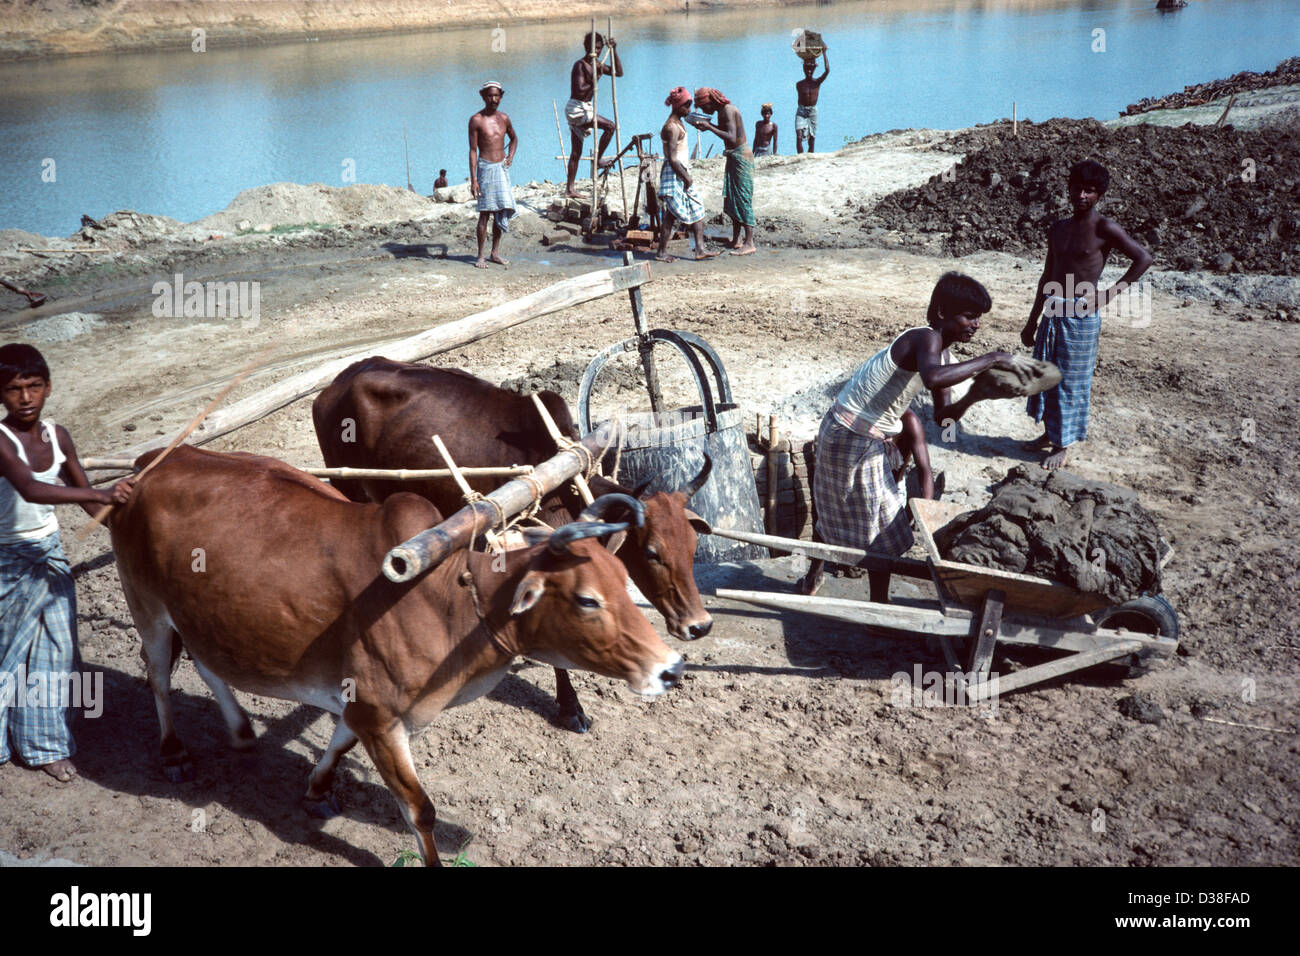 Labourers operating a cattle-driven clay pug mill by the river, supplying clay to local brickworks. Near Jamalpur, Bangladesh Stock Photo